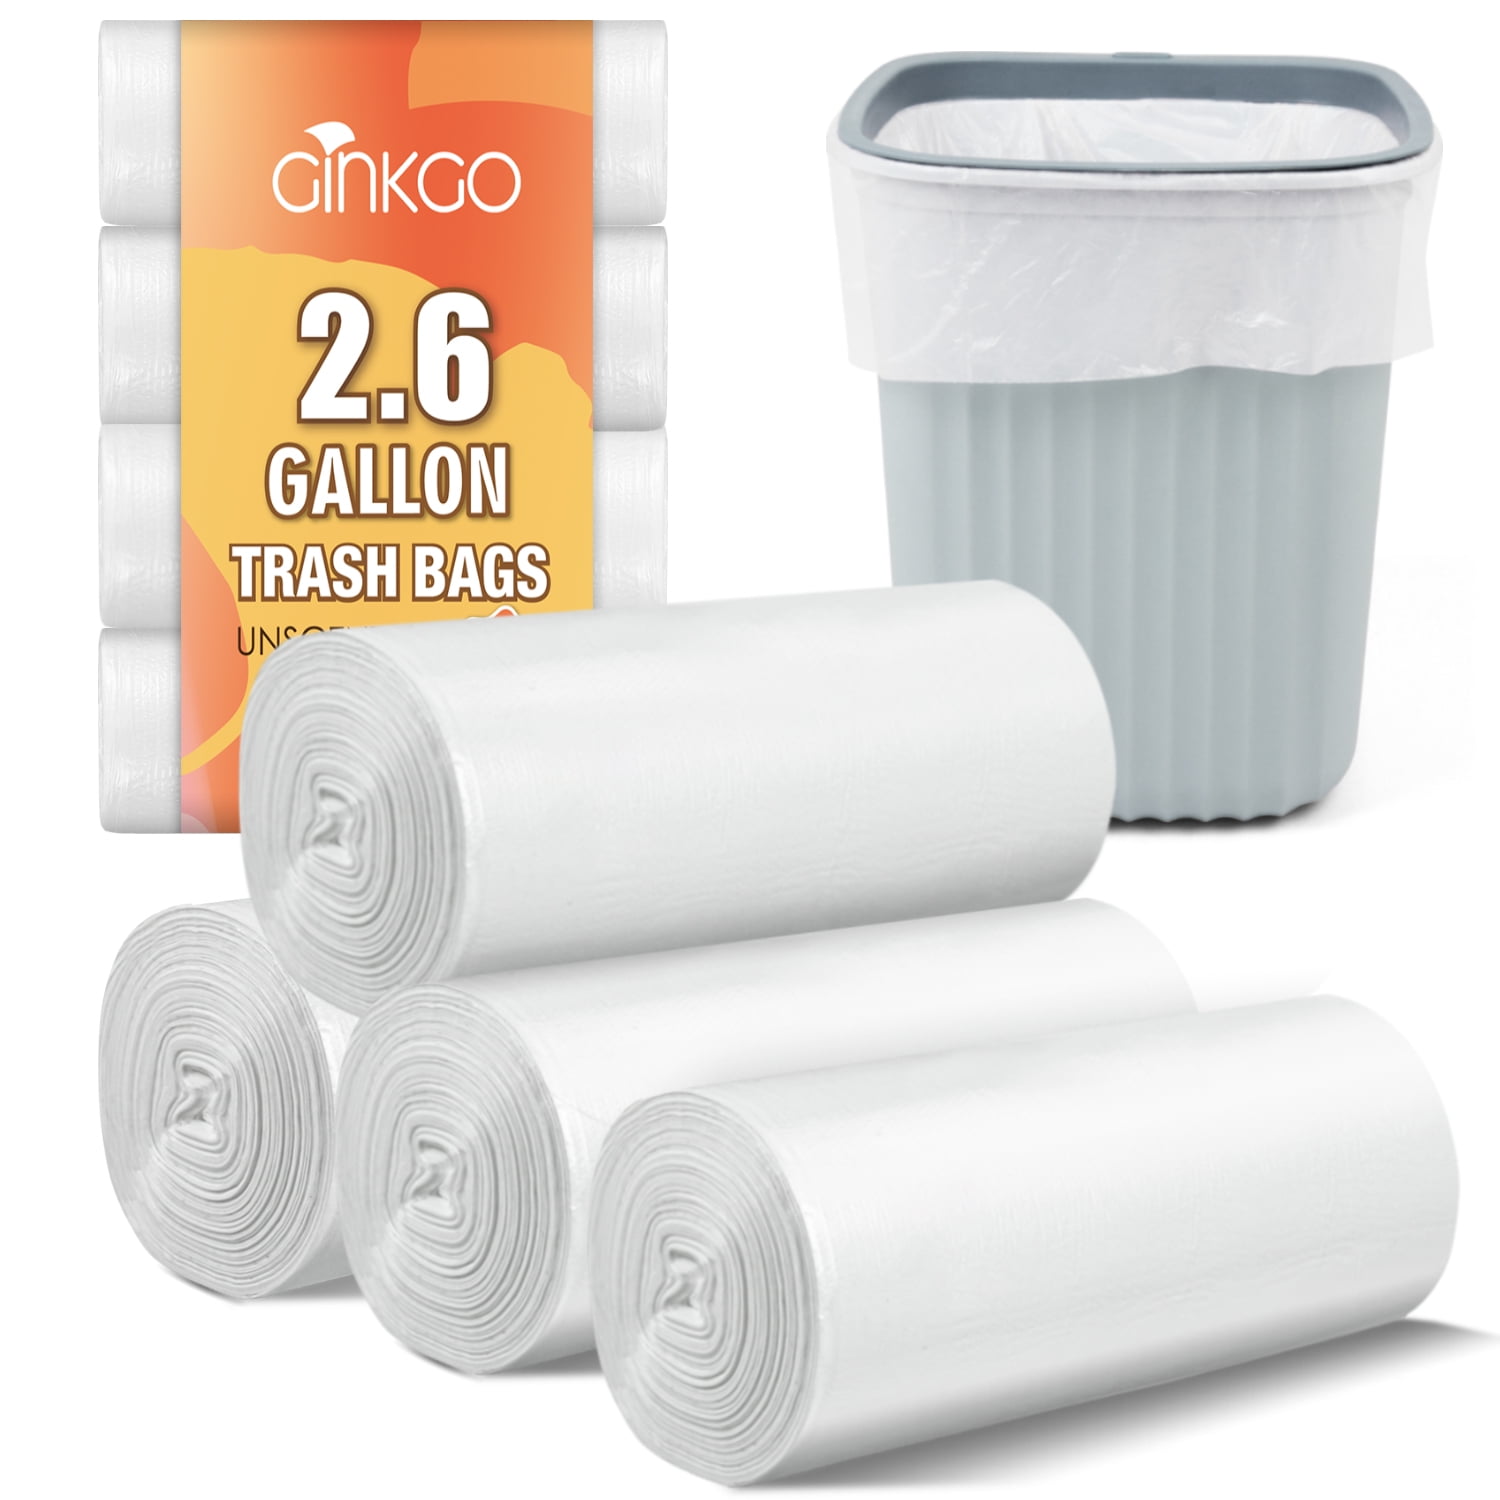 Small Clear Trash Bags - FORID 2.6 Gallon Garbage Bags Wastebasket